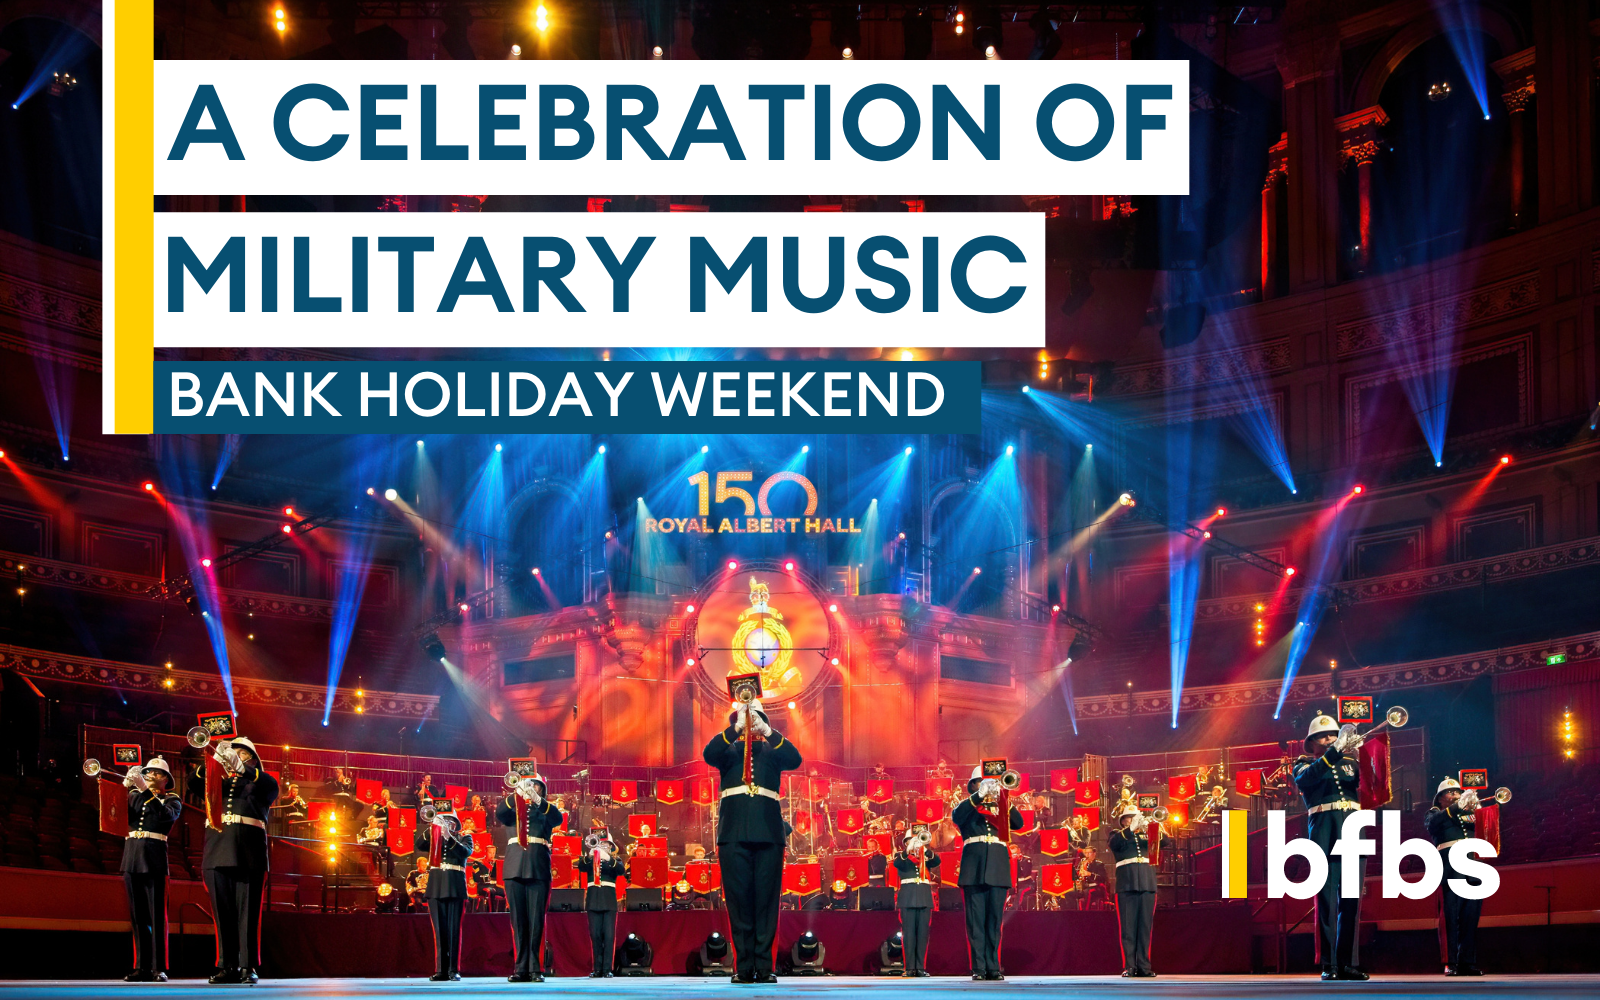 BFBS Applauds Military Music This Bank Holiday